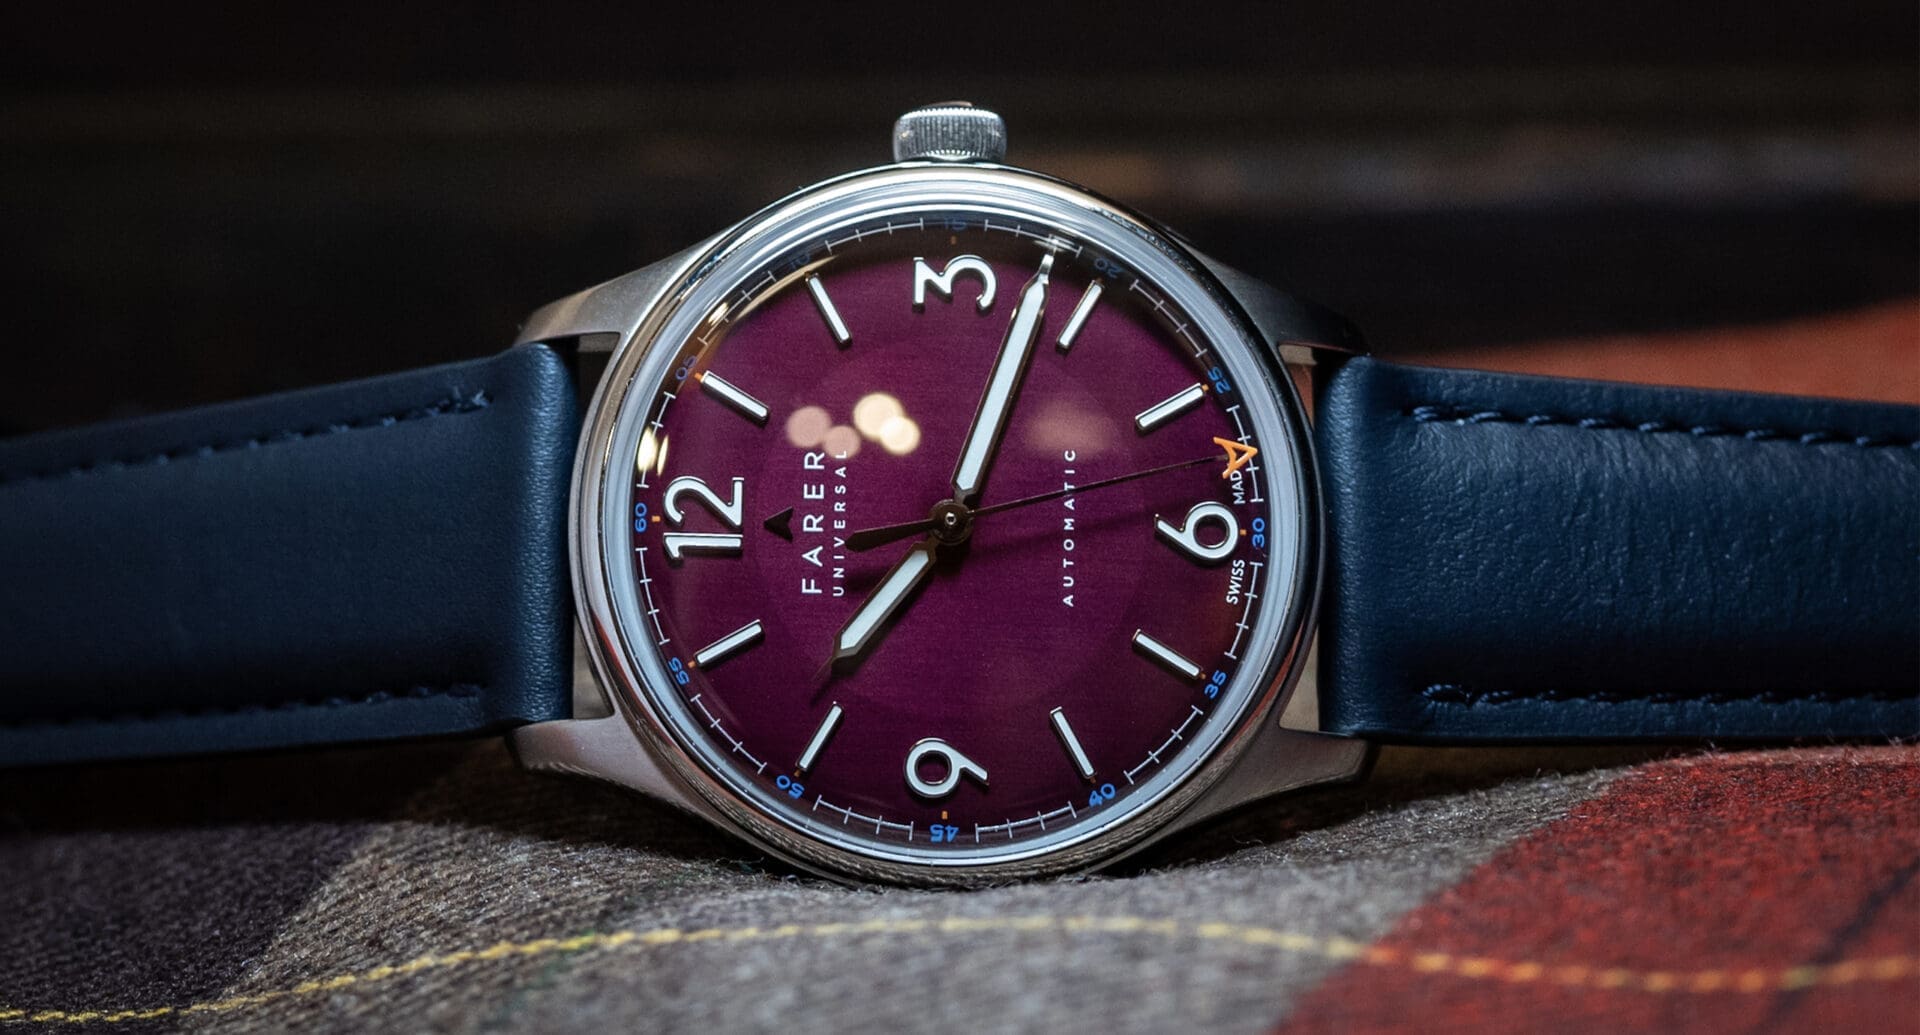 MICRO MONDAYS: Farer’s star keeps rising – these 5 watches from the past year show why